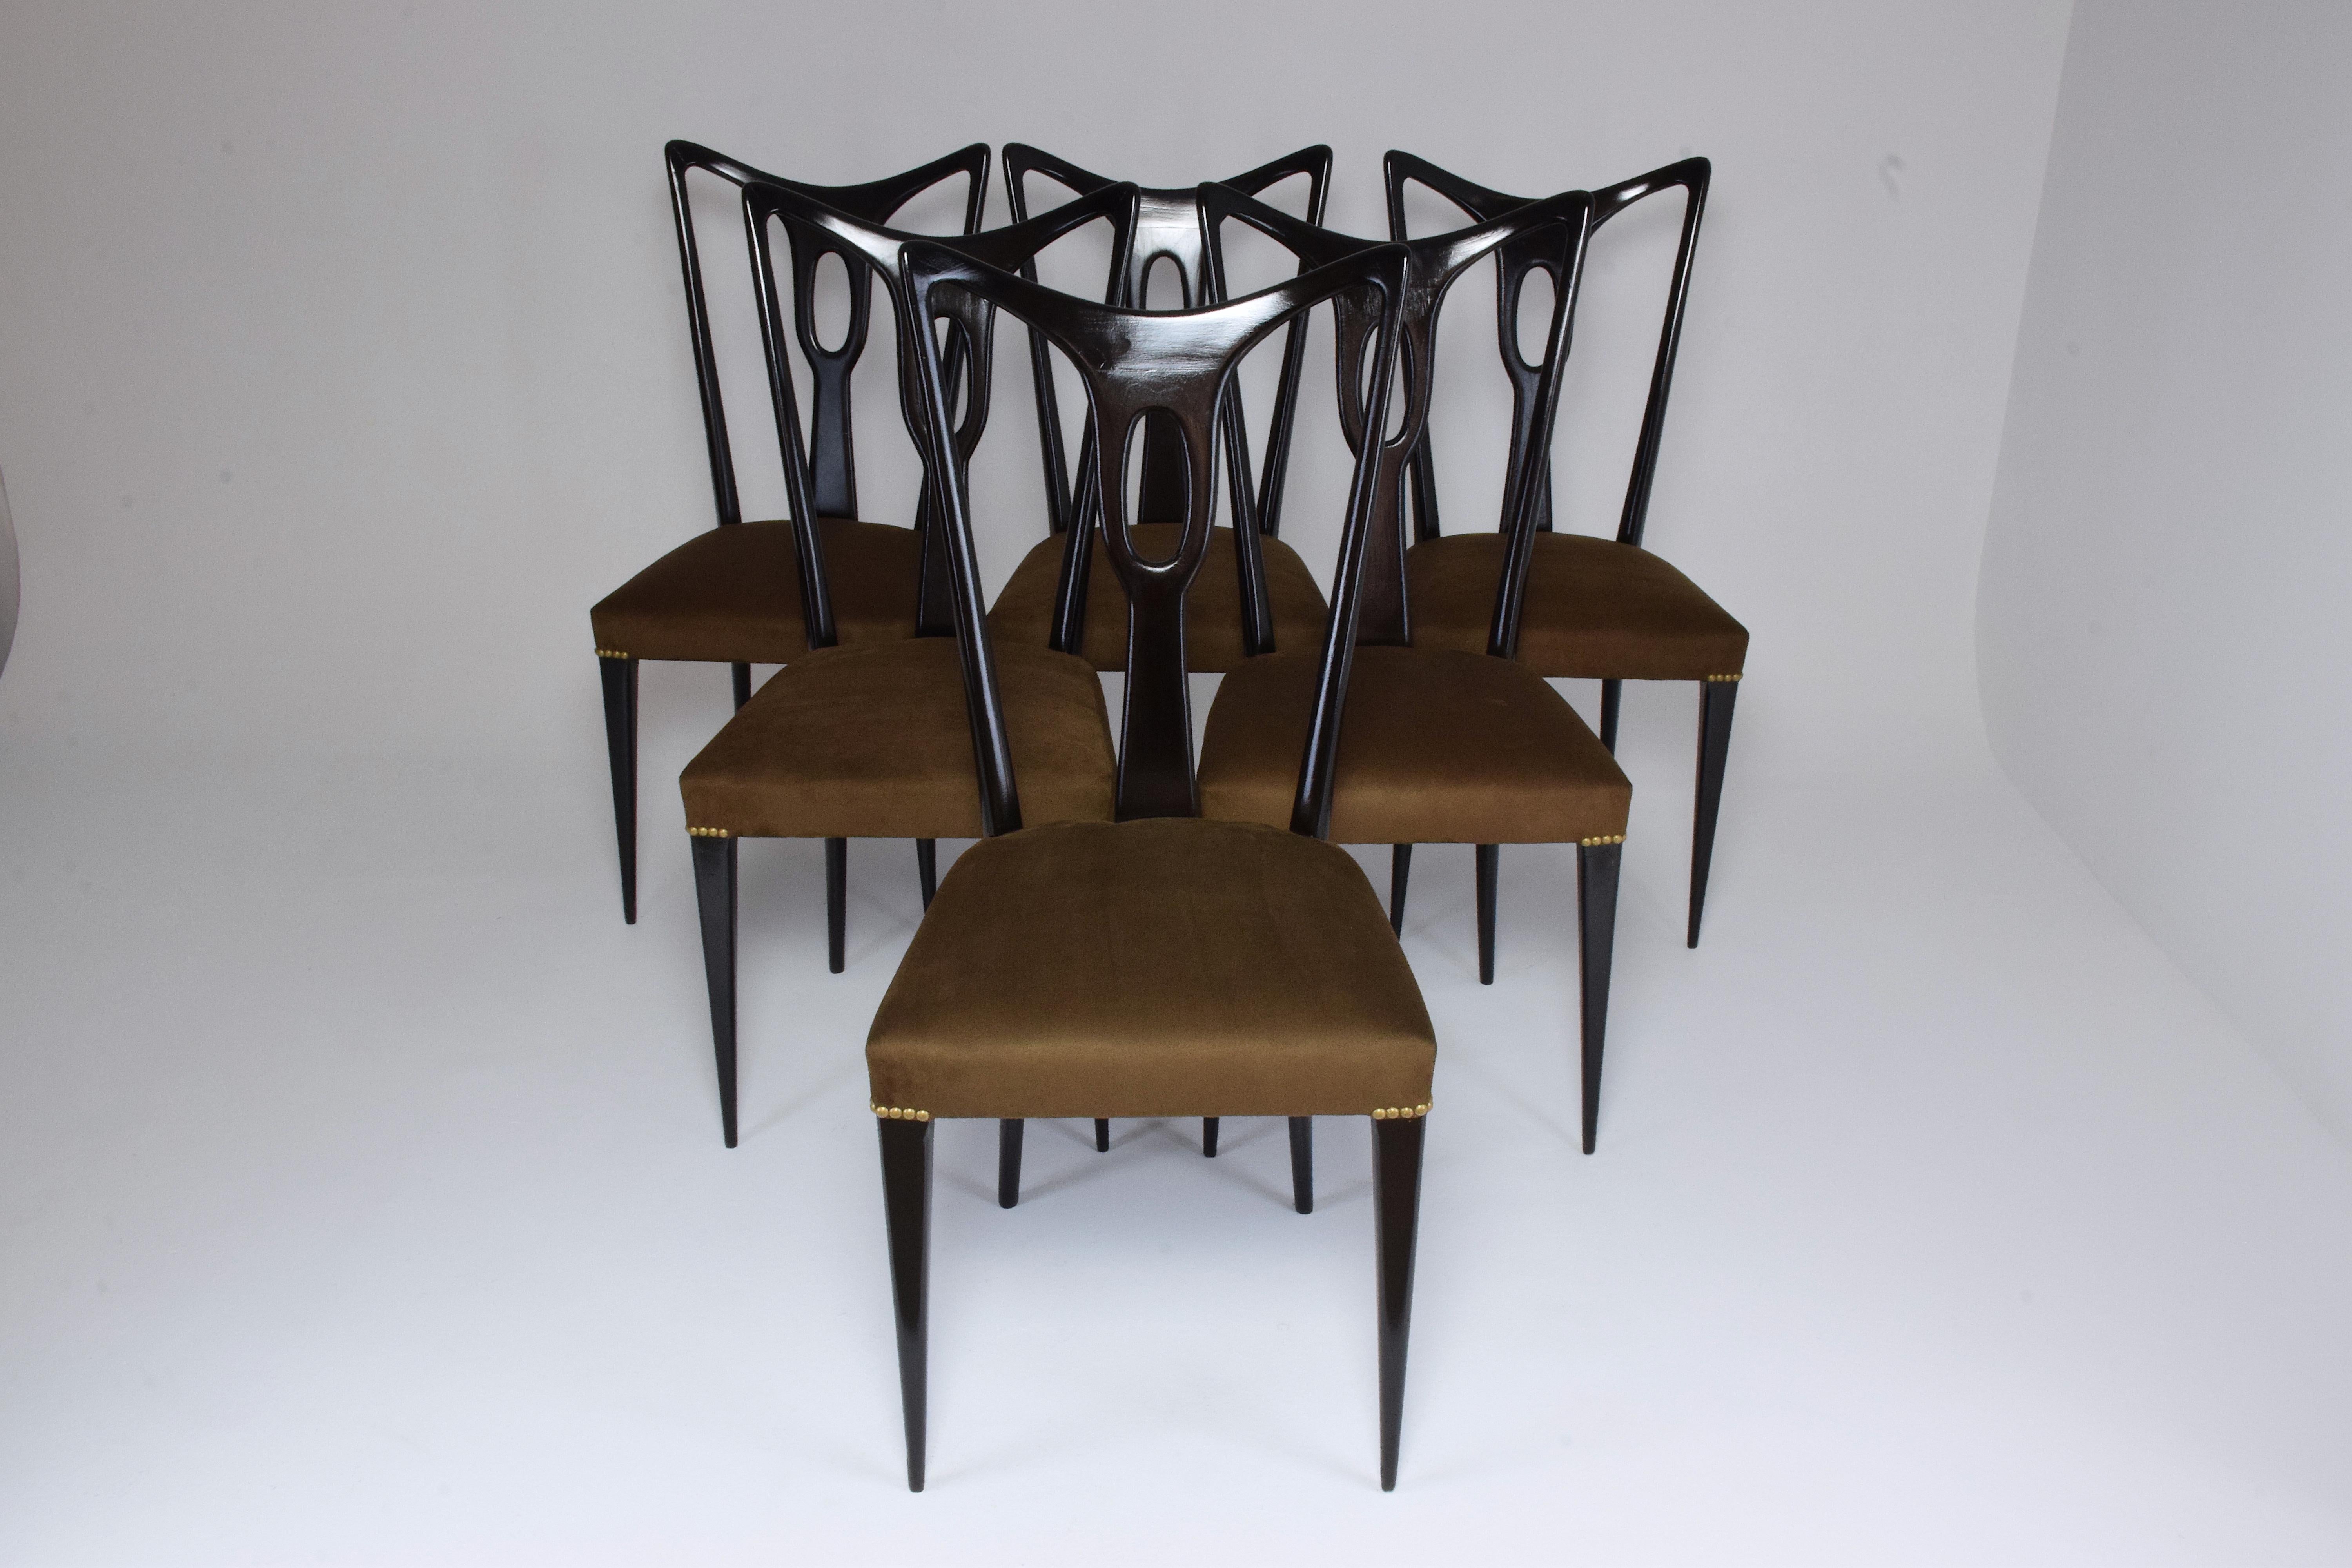 Ebonized Italian Vintage Dining Chairs Attributed to Guglielmo Ulrich, Set of Six, 1940s